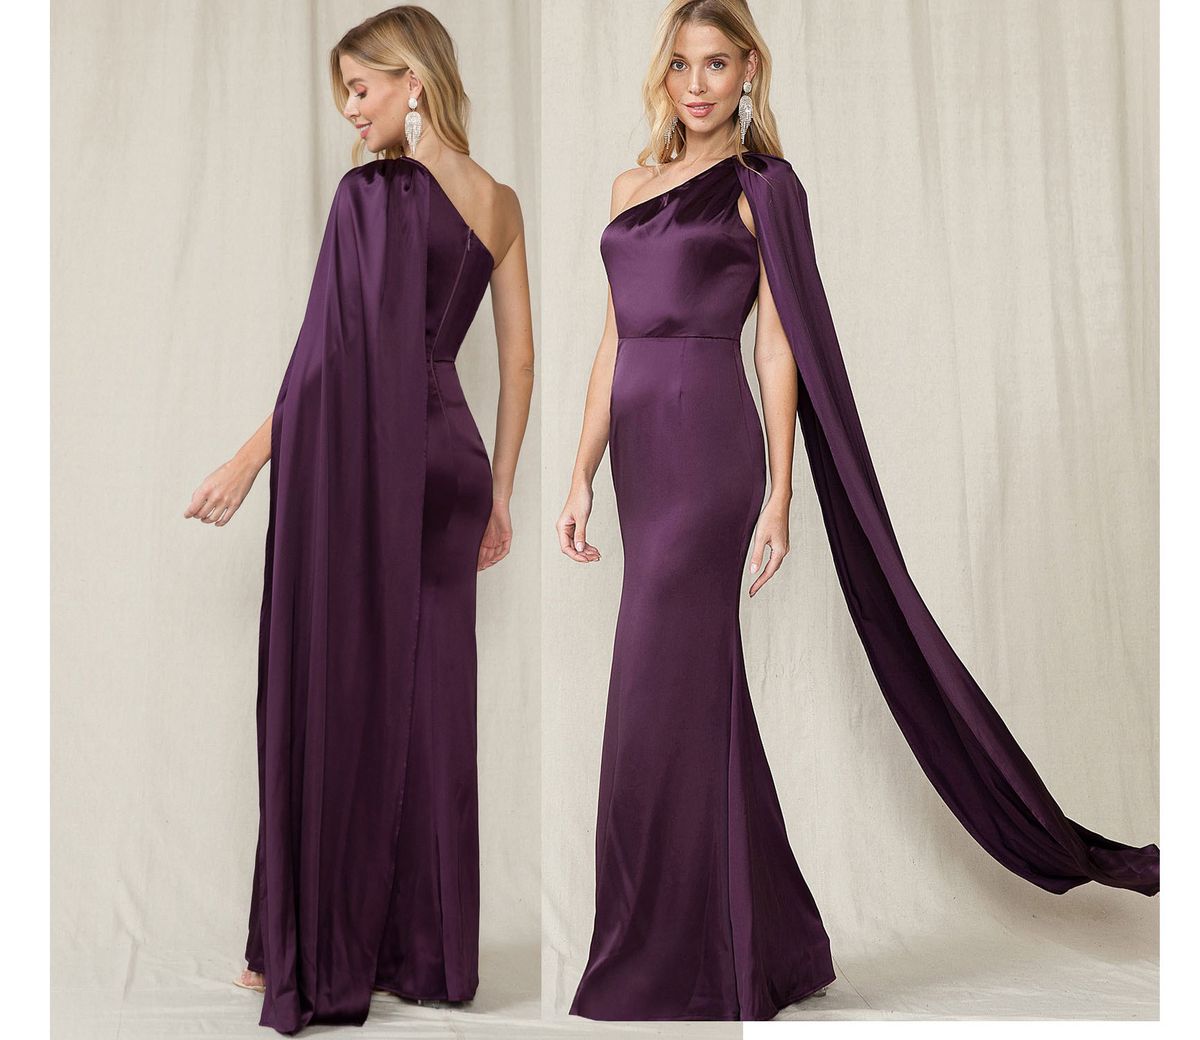 Style Eggplant Purple Grecian One Shoulder Cape Satin Formal Gown Maniju Size 8 Wedding Guest One Shoulder Purple Floor Length Maxi on Queenly